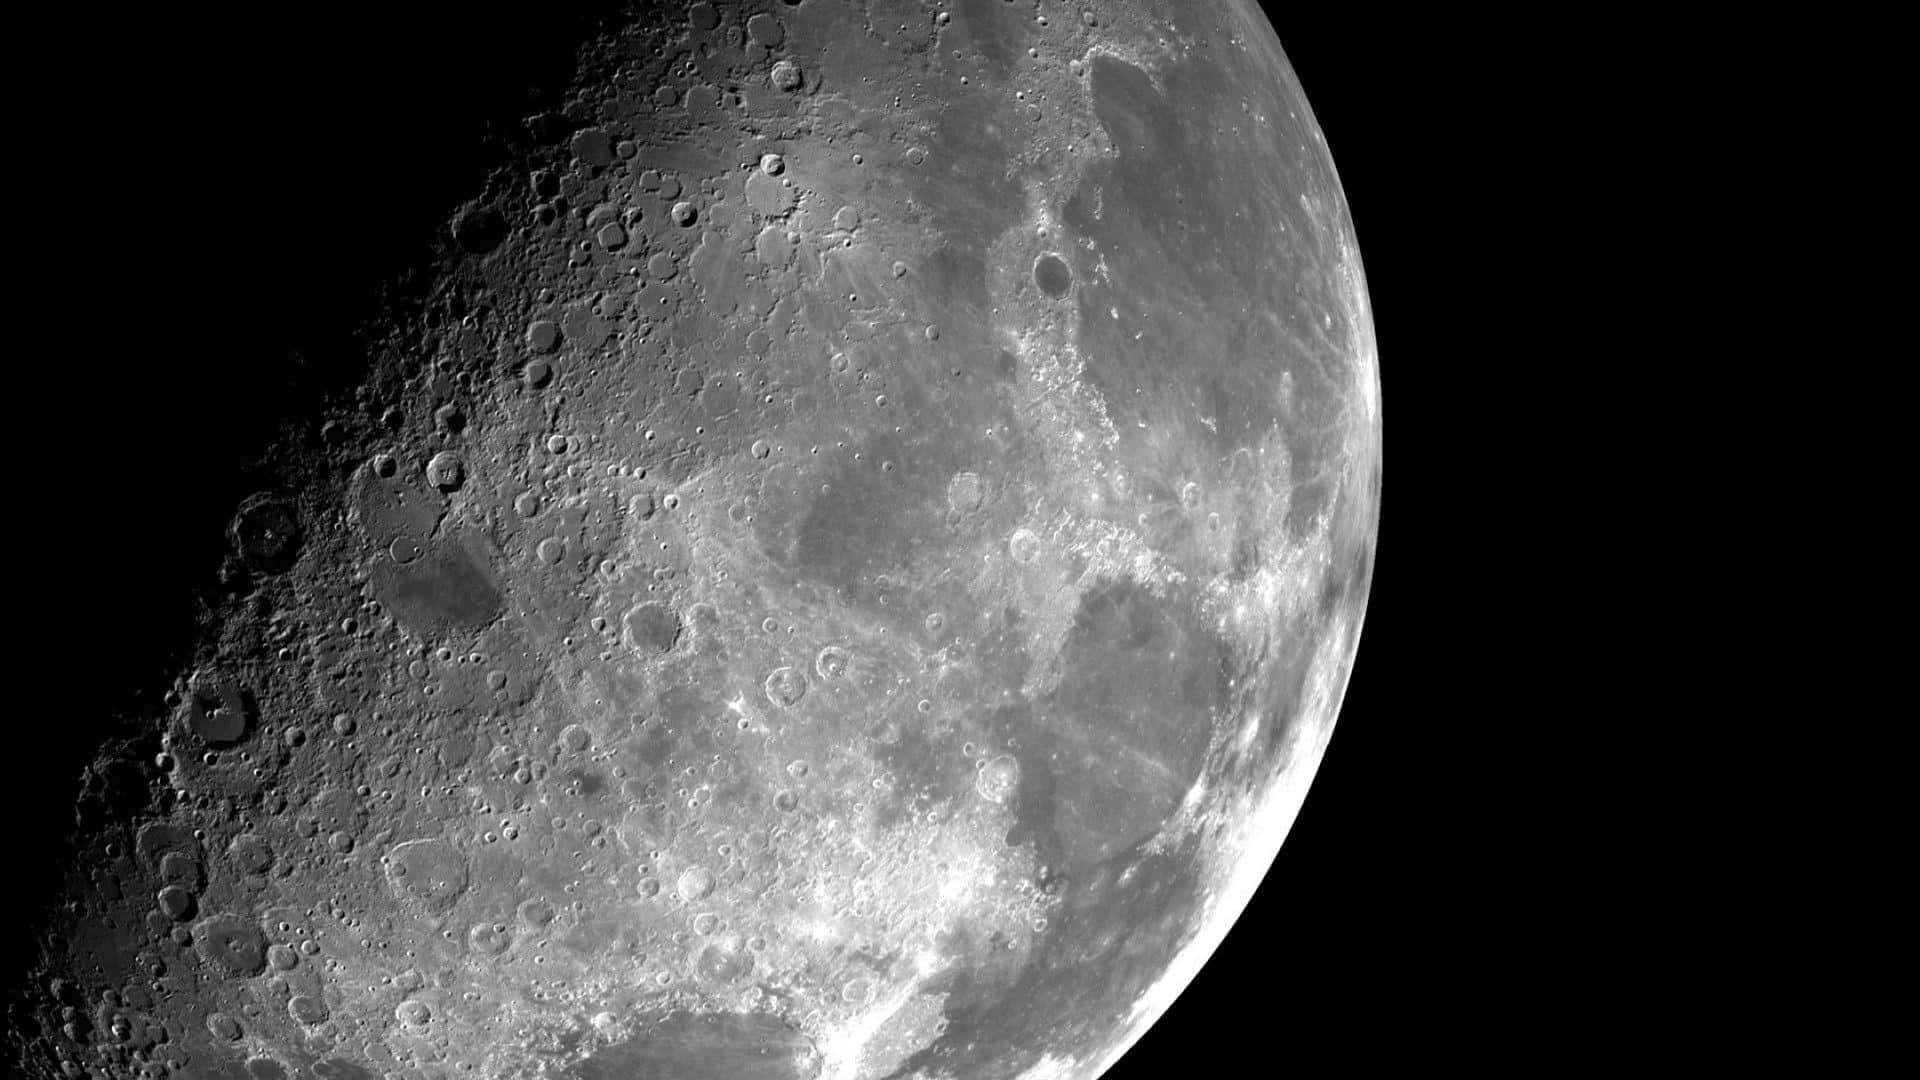 Download A Stunning High-resolution Image Of The Moon's Surface ...